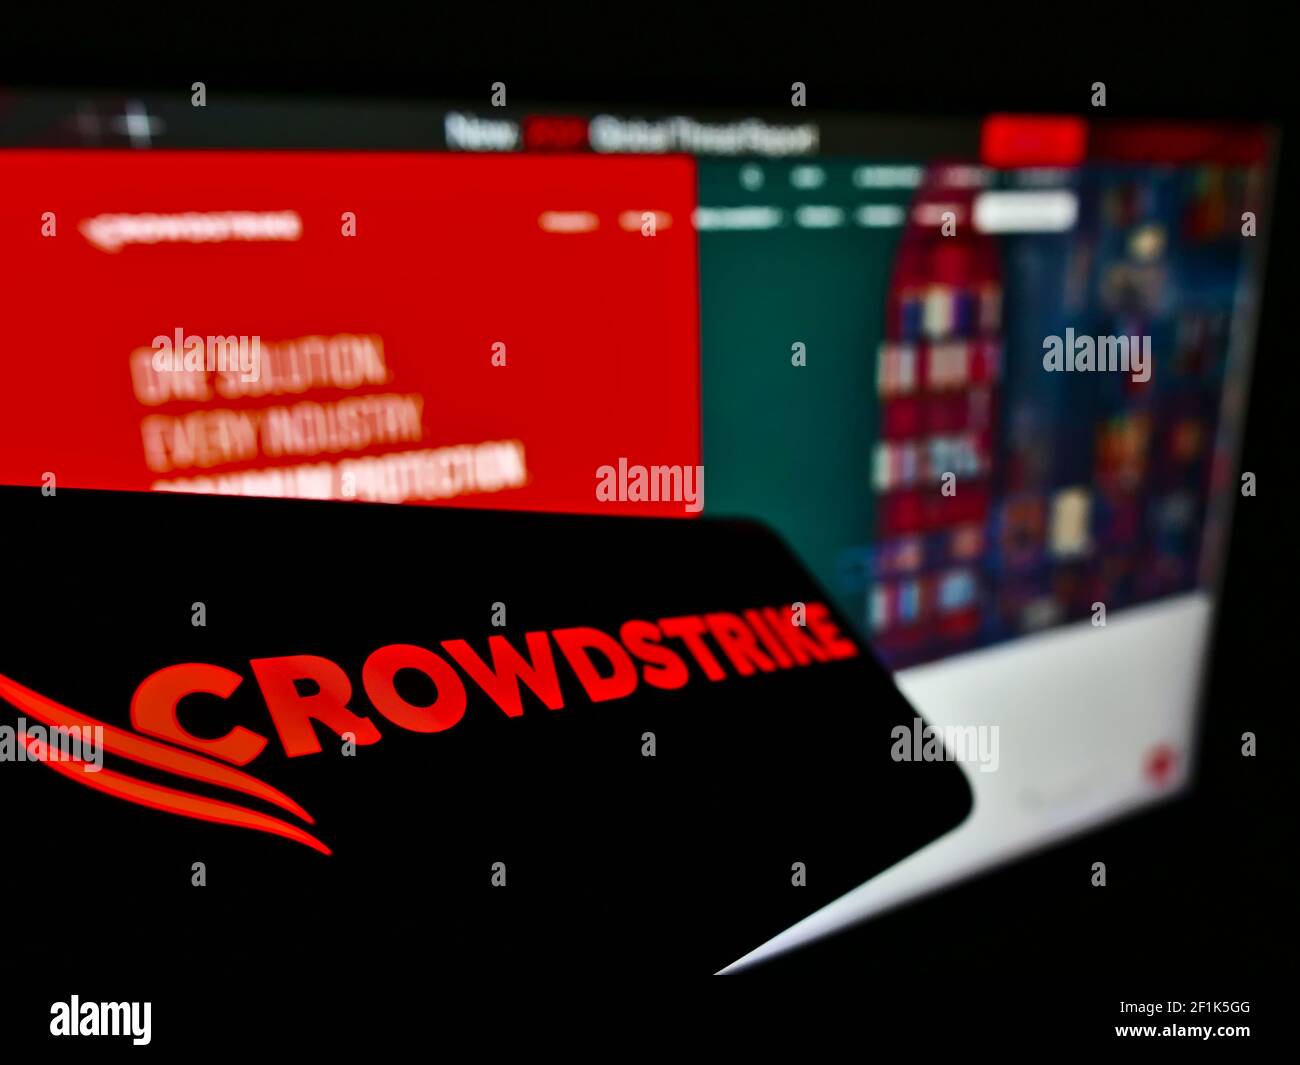 Mobile phone with logo of US cyber security company CrowdStrike Holdings Inc. on screen in front of web page. Focus on center-left of phone display. Stock Photo